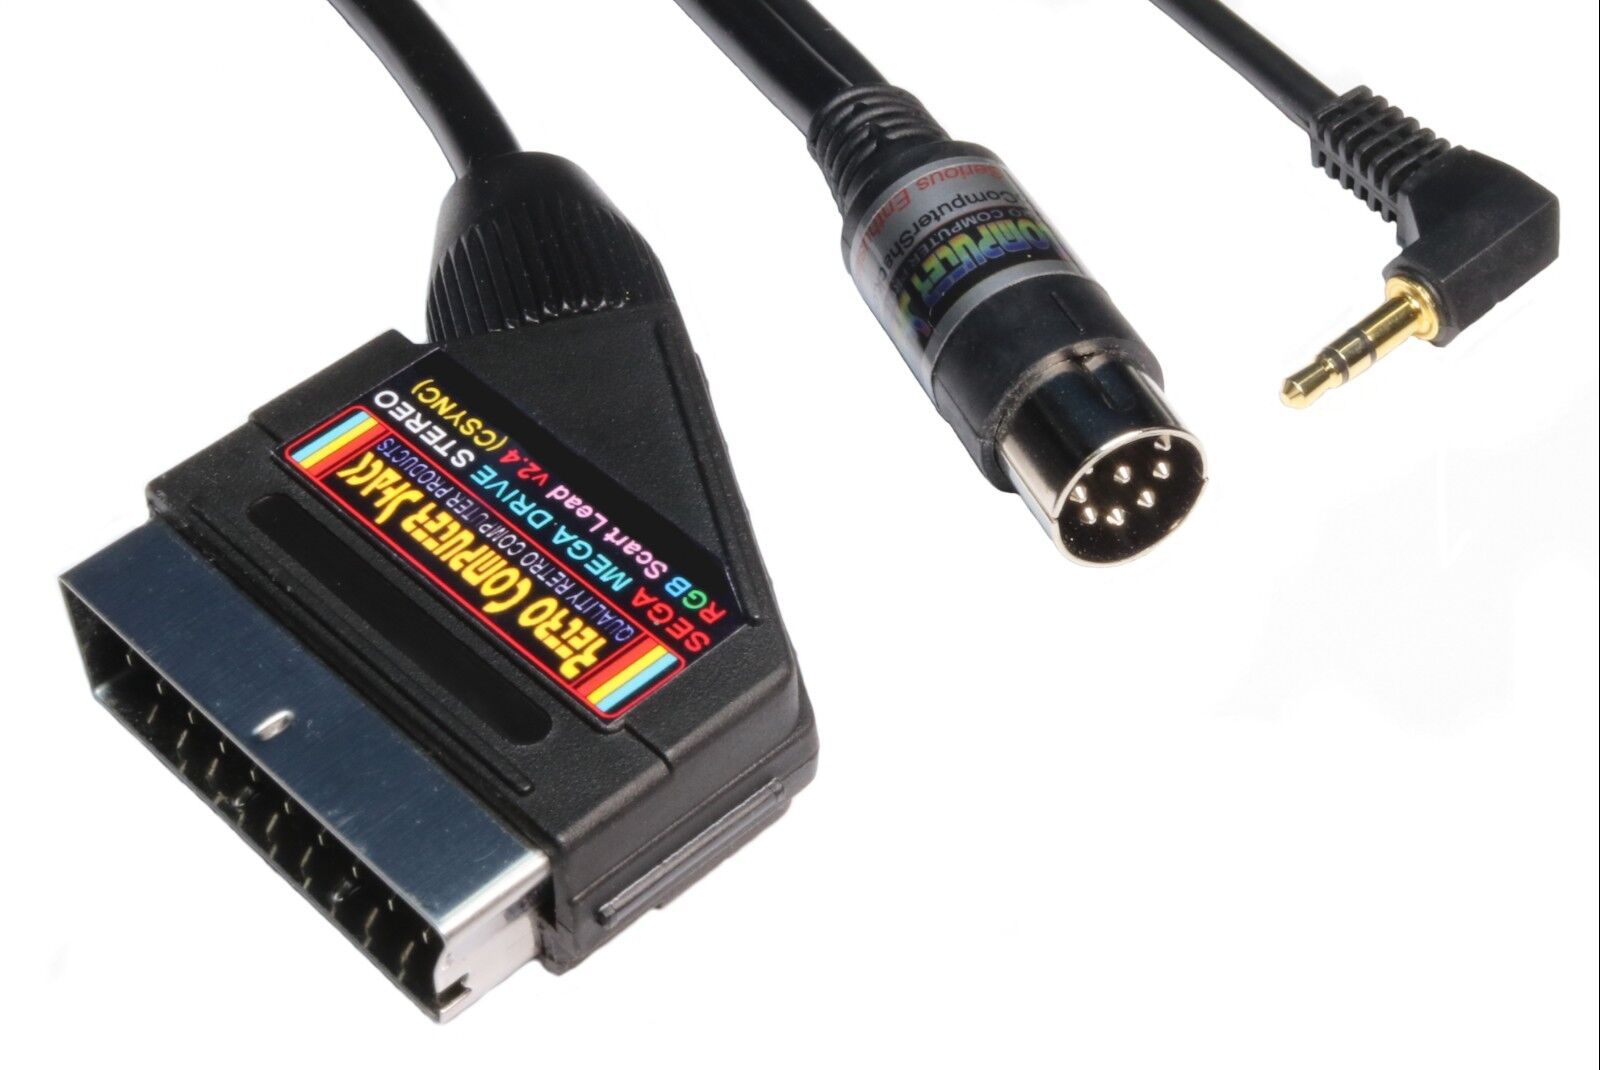 Sega Mega Drive High Quality RGB Scart TV Lead Video Cable with STEREO sound